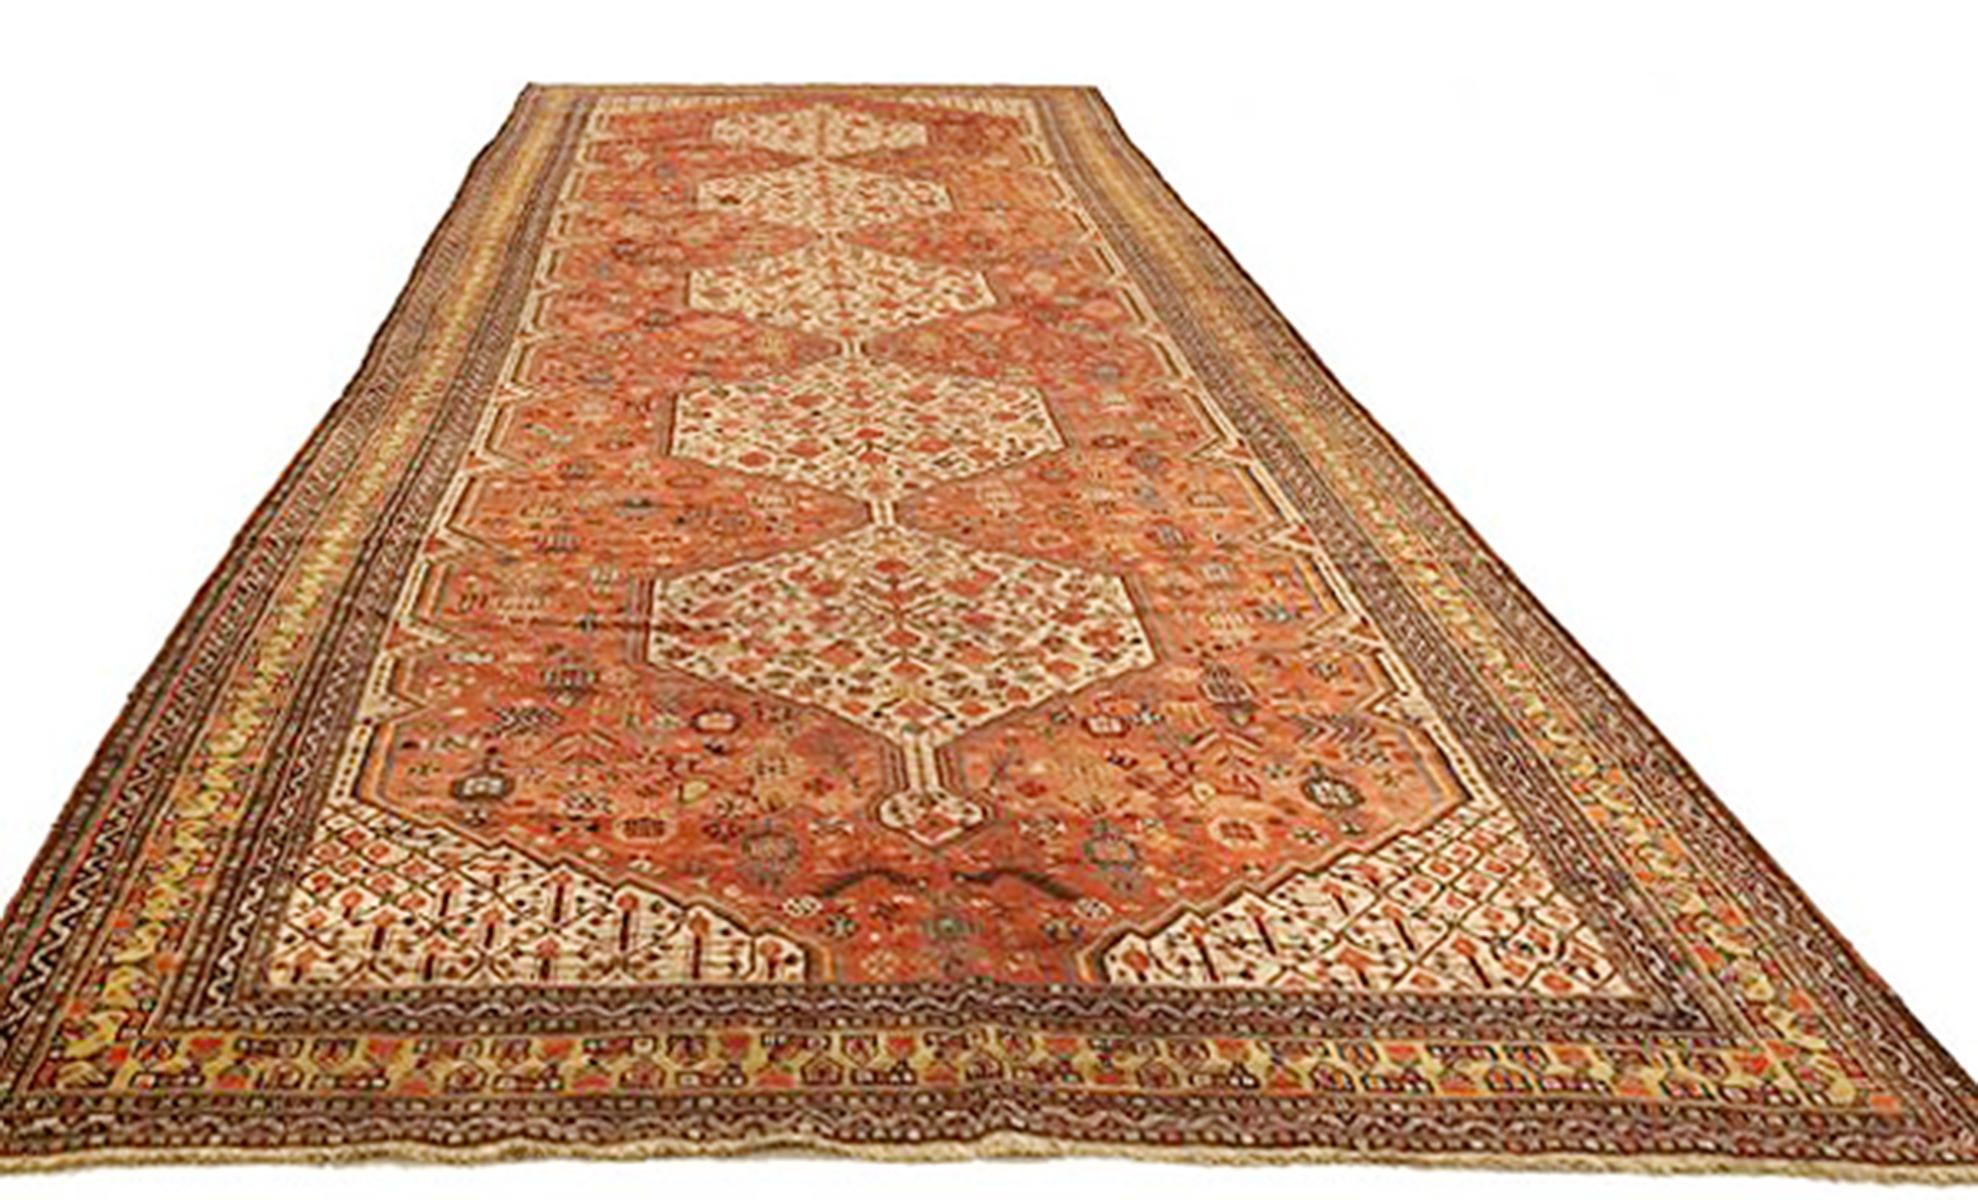 Antique Persian rug handwoven from the finest sheep’s wool and colored with all-natural vegetable dyes that are safe for humans and pets. It’s a traditional Shiraz design featuring green and brown floral medallions over a mix of black and navy